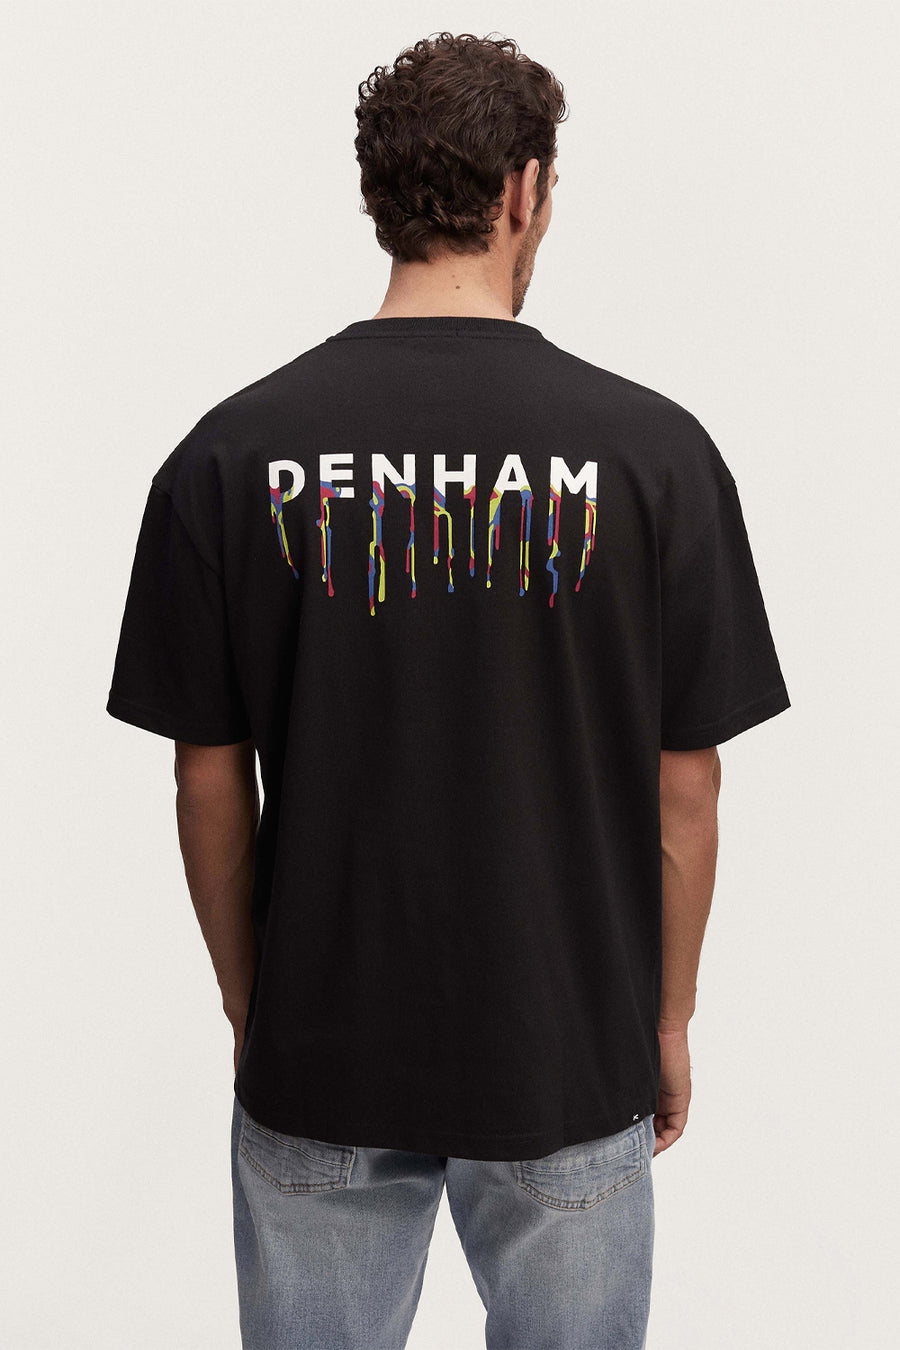 Buy the Denham Drip Boxy Fit T-Shirt in Black at Intro. Spend £50 for free UK delivery. Official stockists. We ship worldwide.